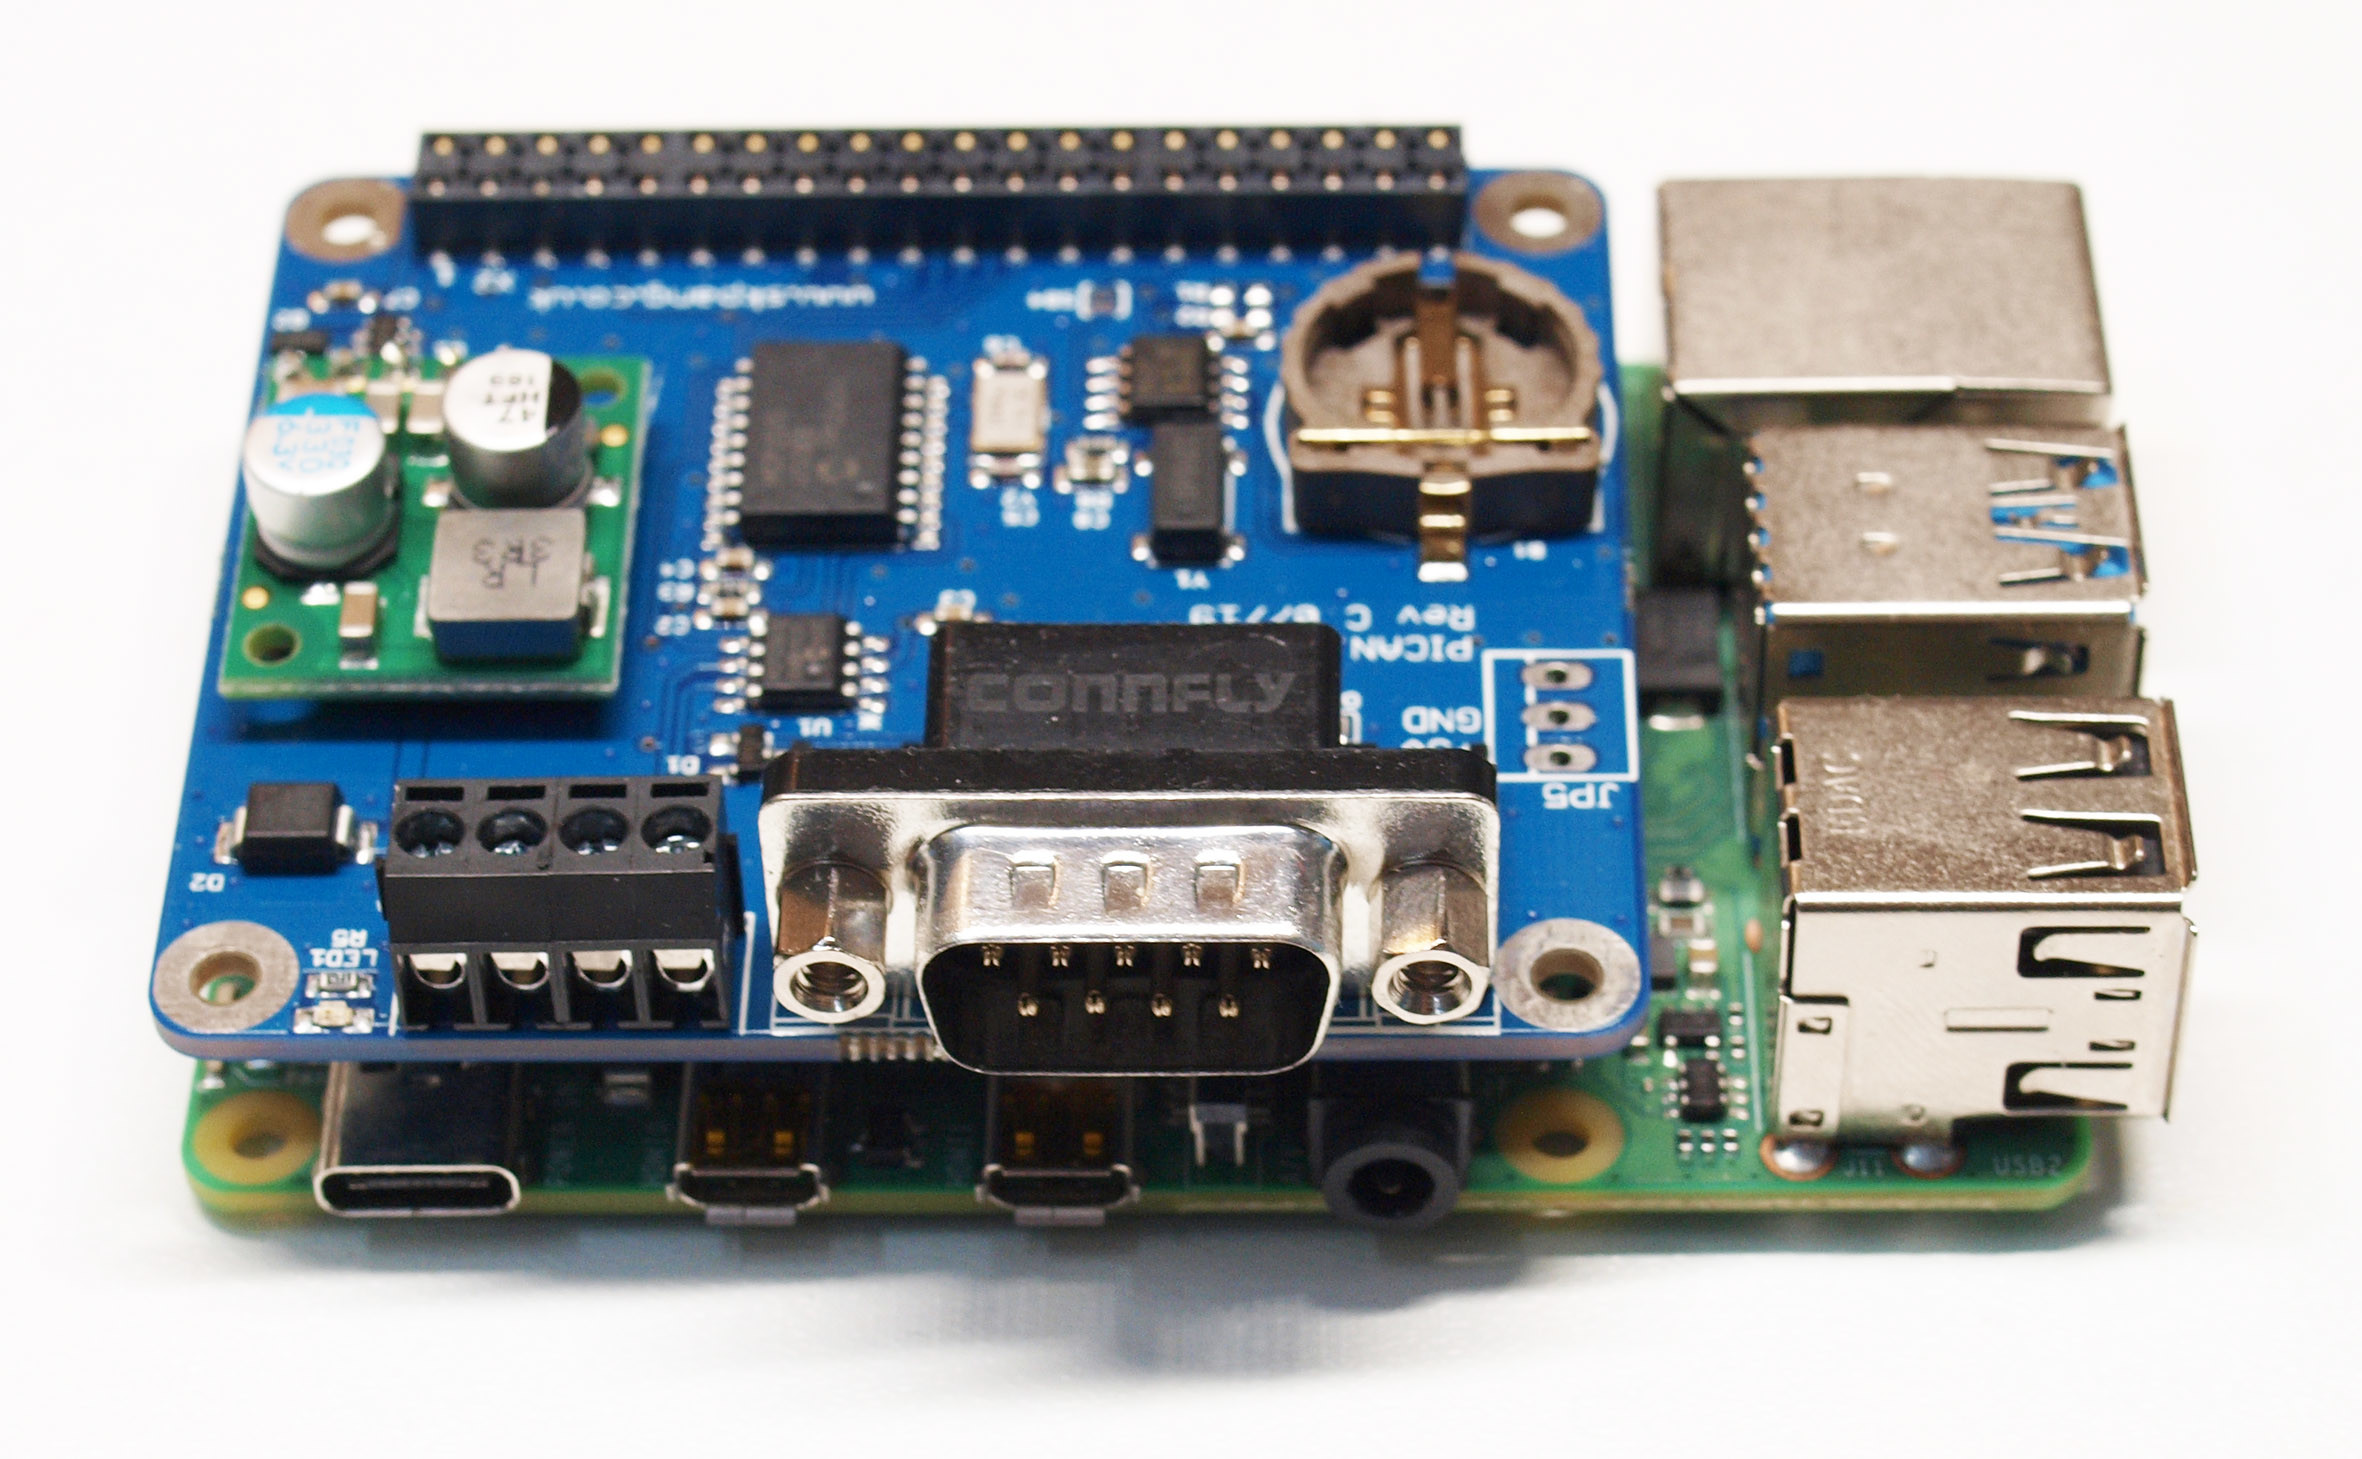  The PiCAN 3 board offers two ways to connect 